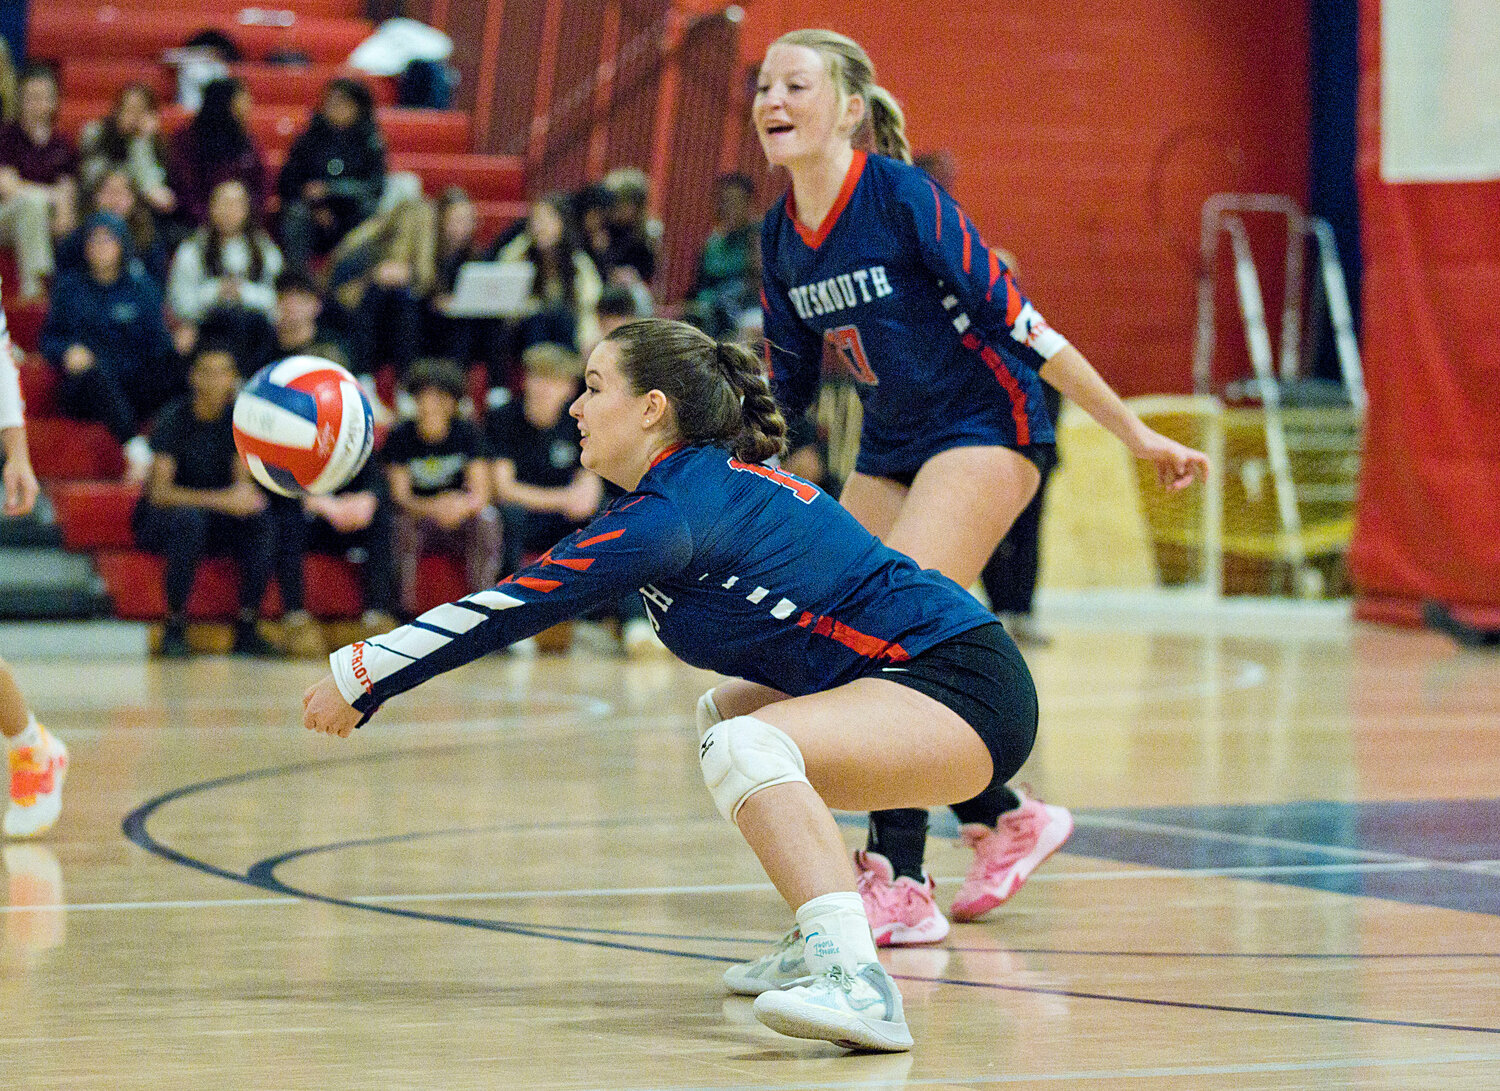 Madelyn Krzych keeps the ball in play while competing against La Salle.